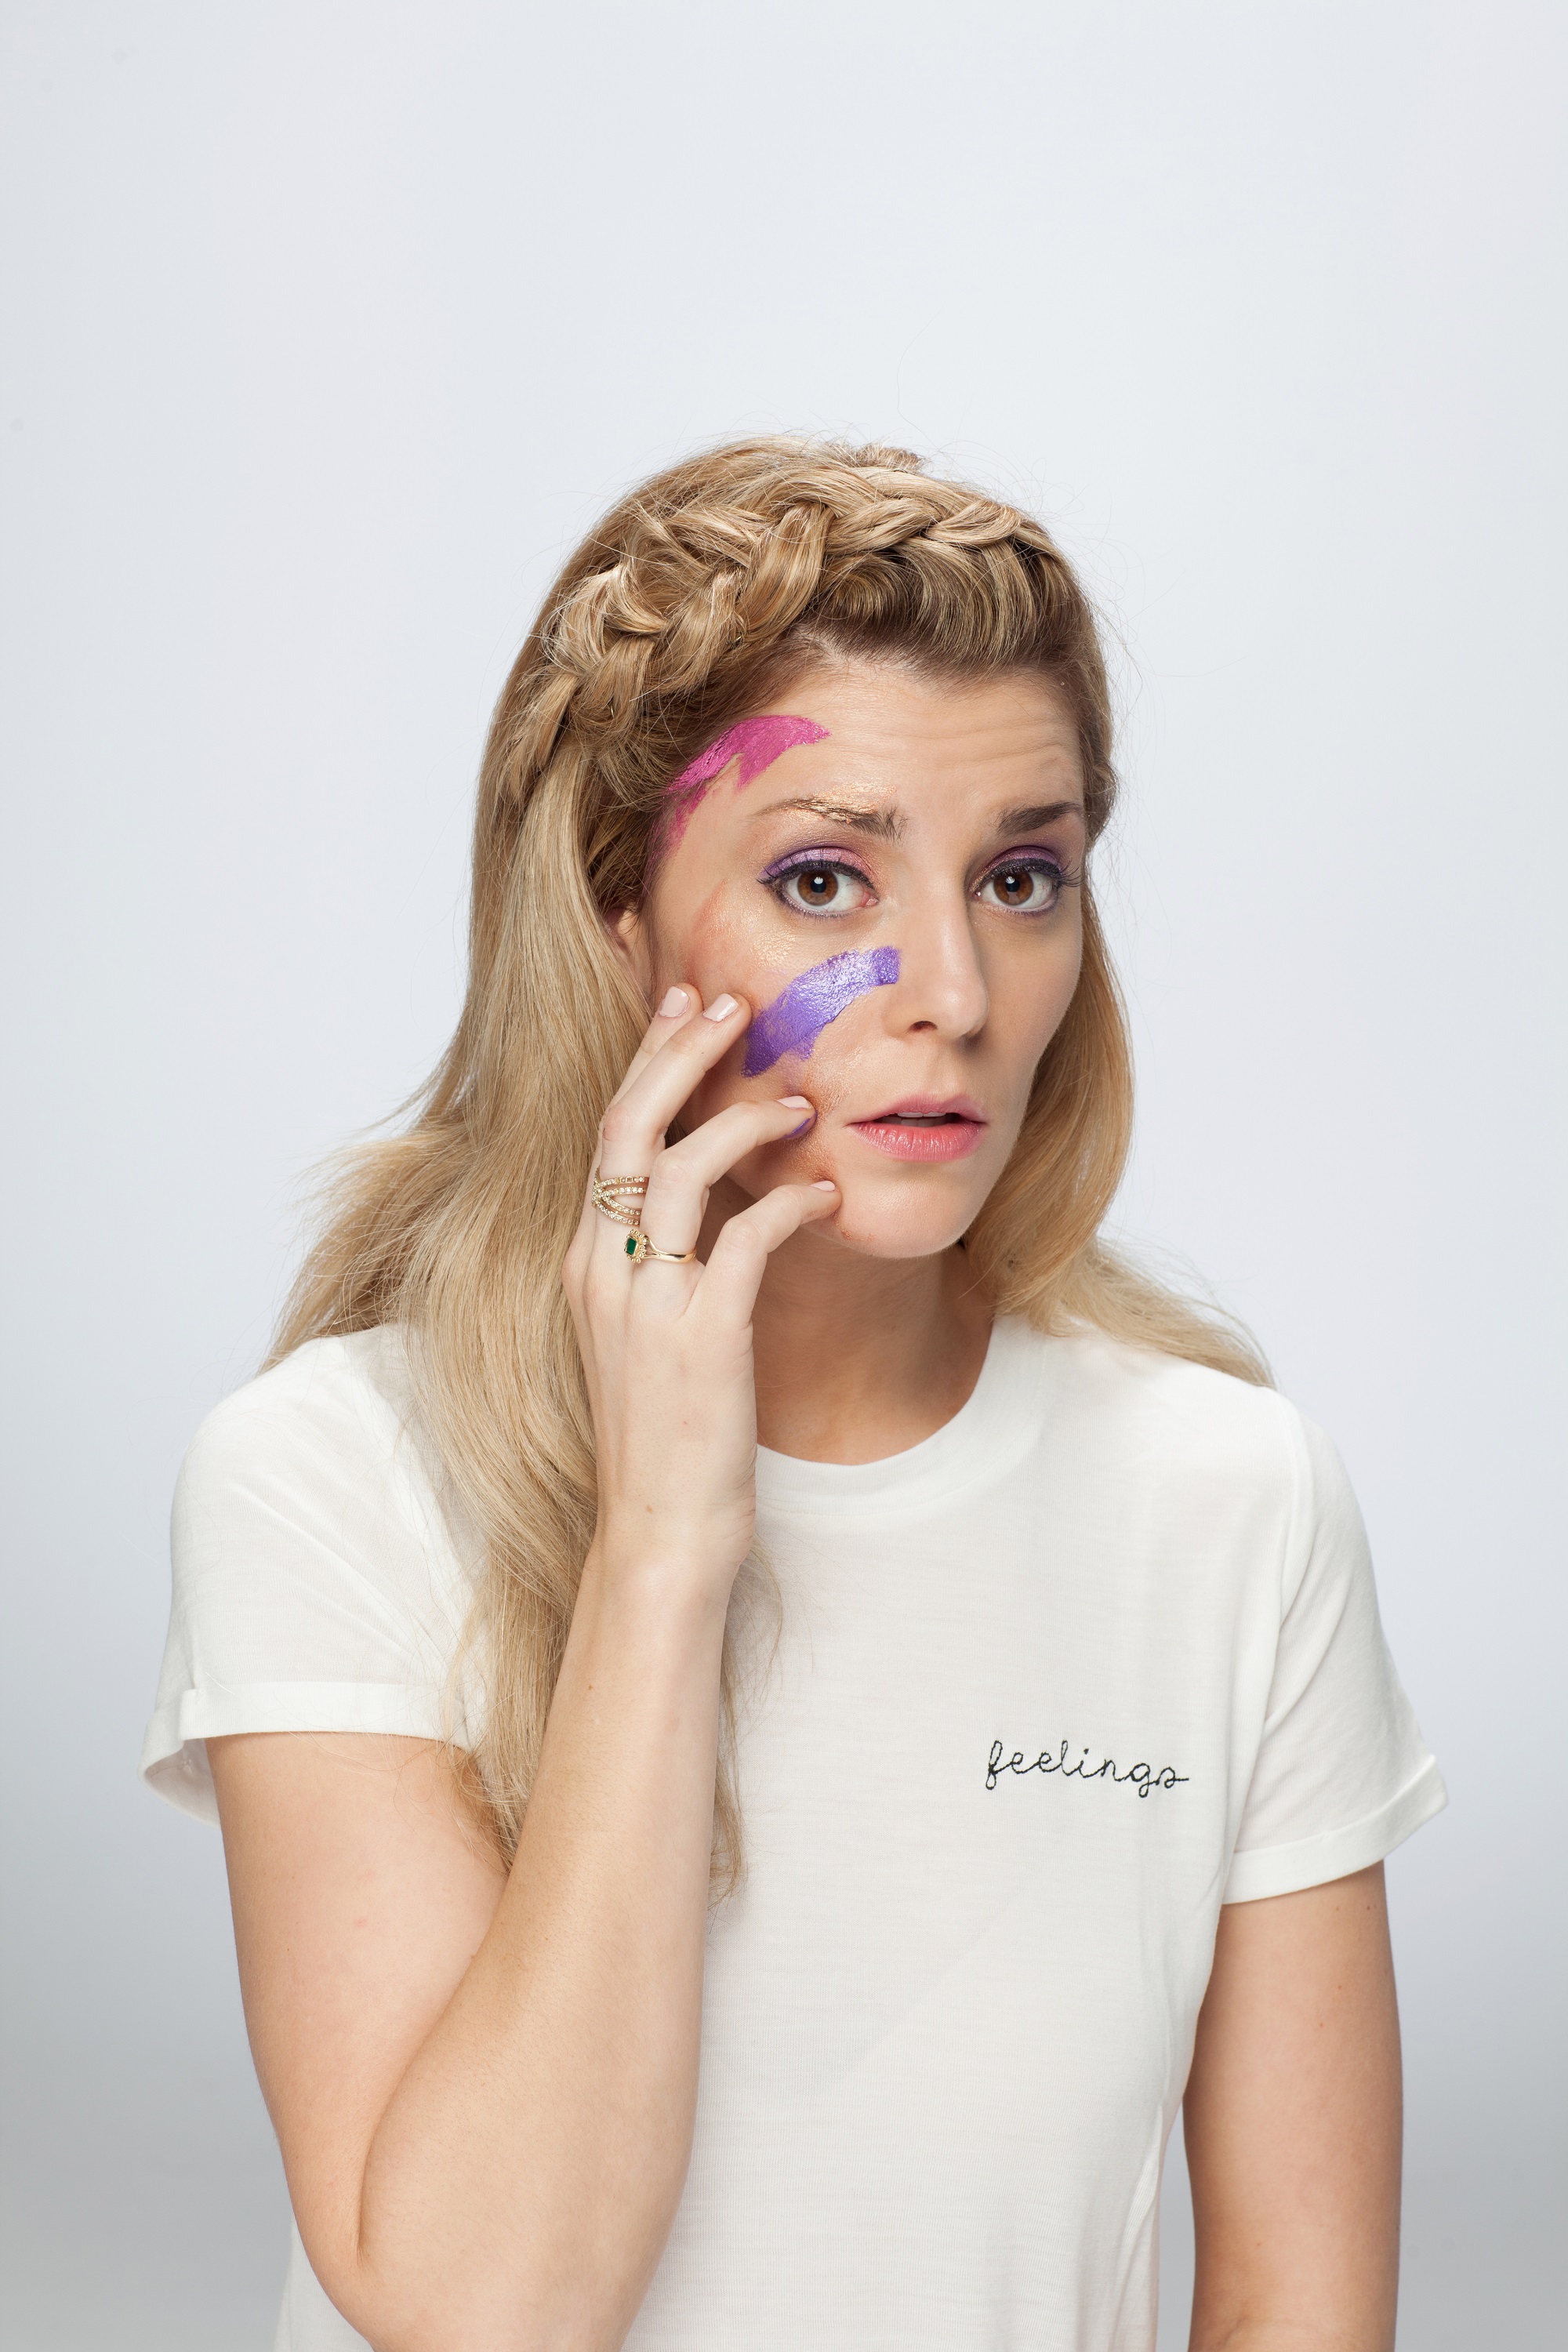 Grace Helbig book interview 'Grace & Style: The Art of Pretending You Have It'